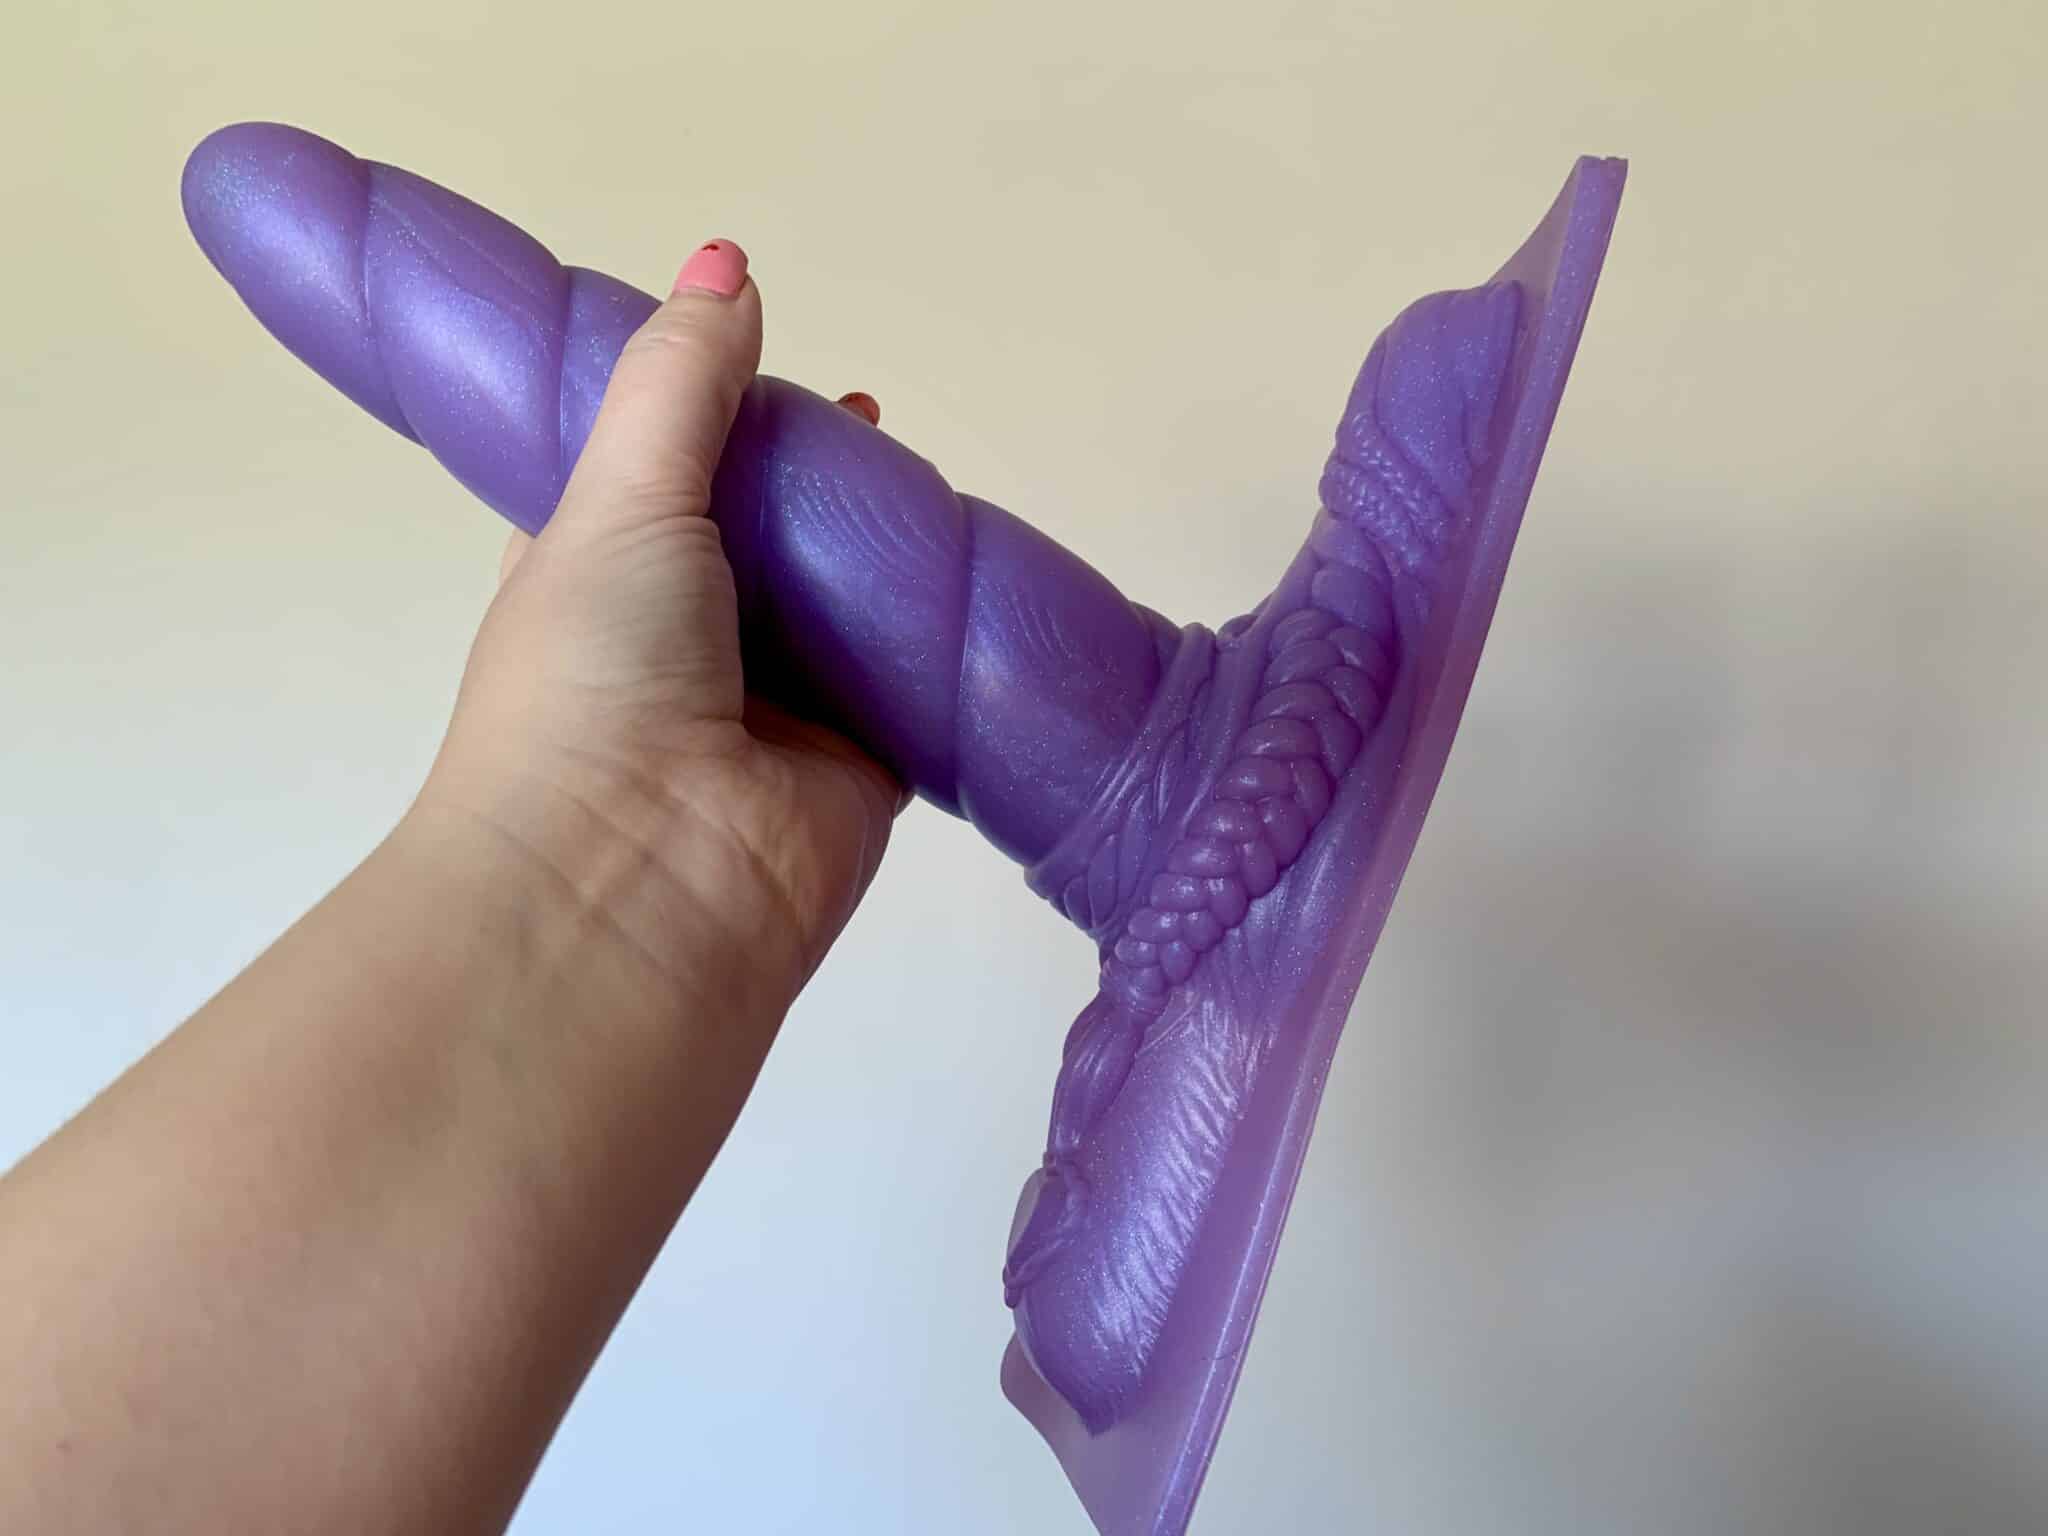 Mystic Bad Dragon Motorbunny Attachment My perspective on the design